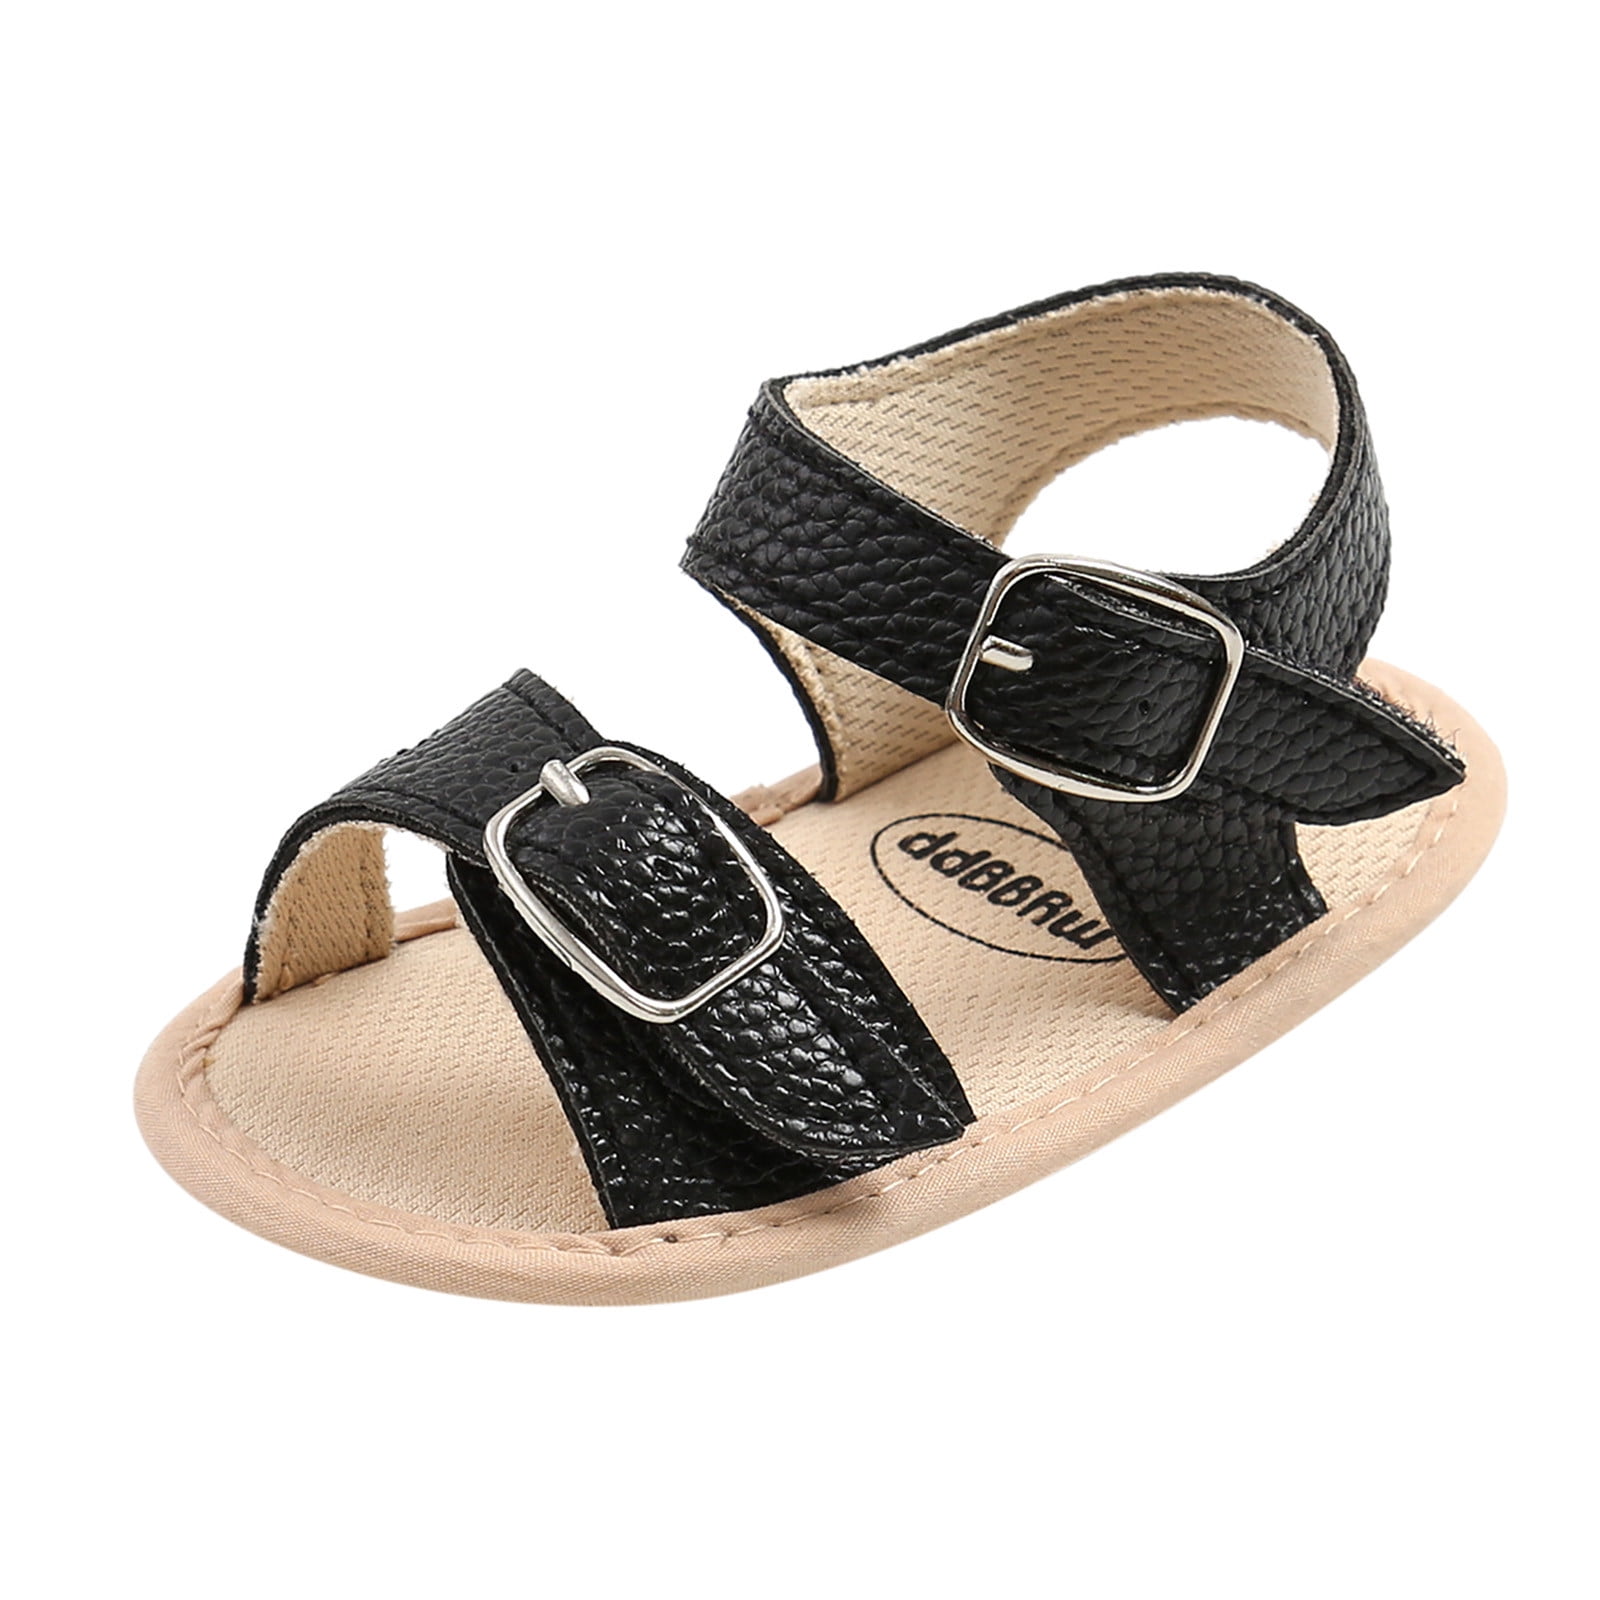 SUNSIOM Baby Girl Sandals Flexible Non-slip Bowknot Summer Casual Daily  Flats Toddler Shoes